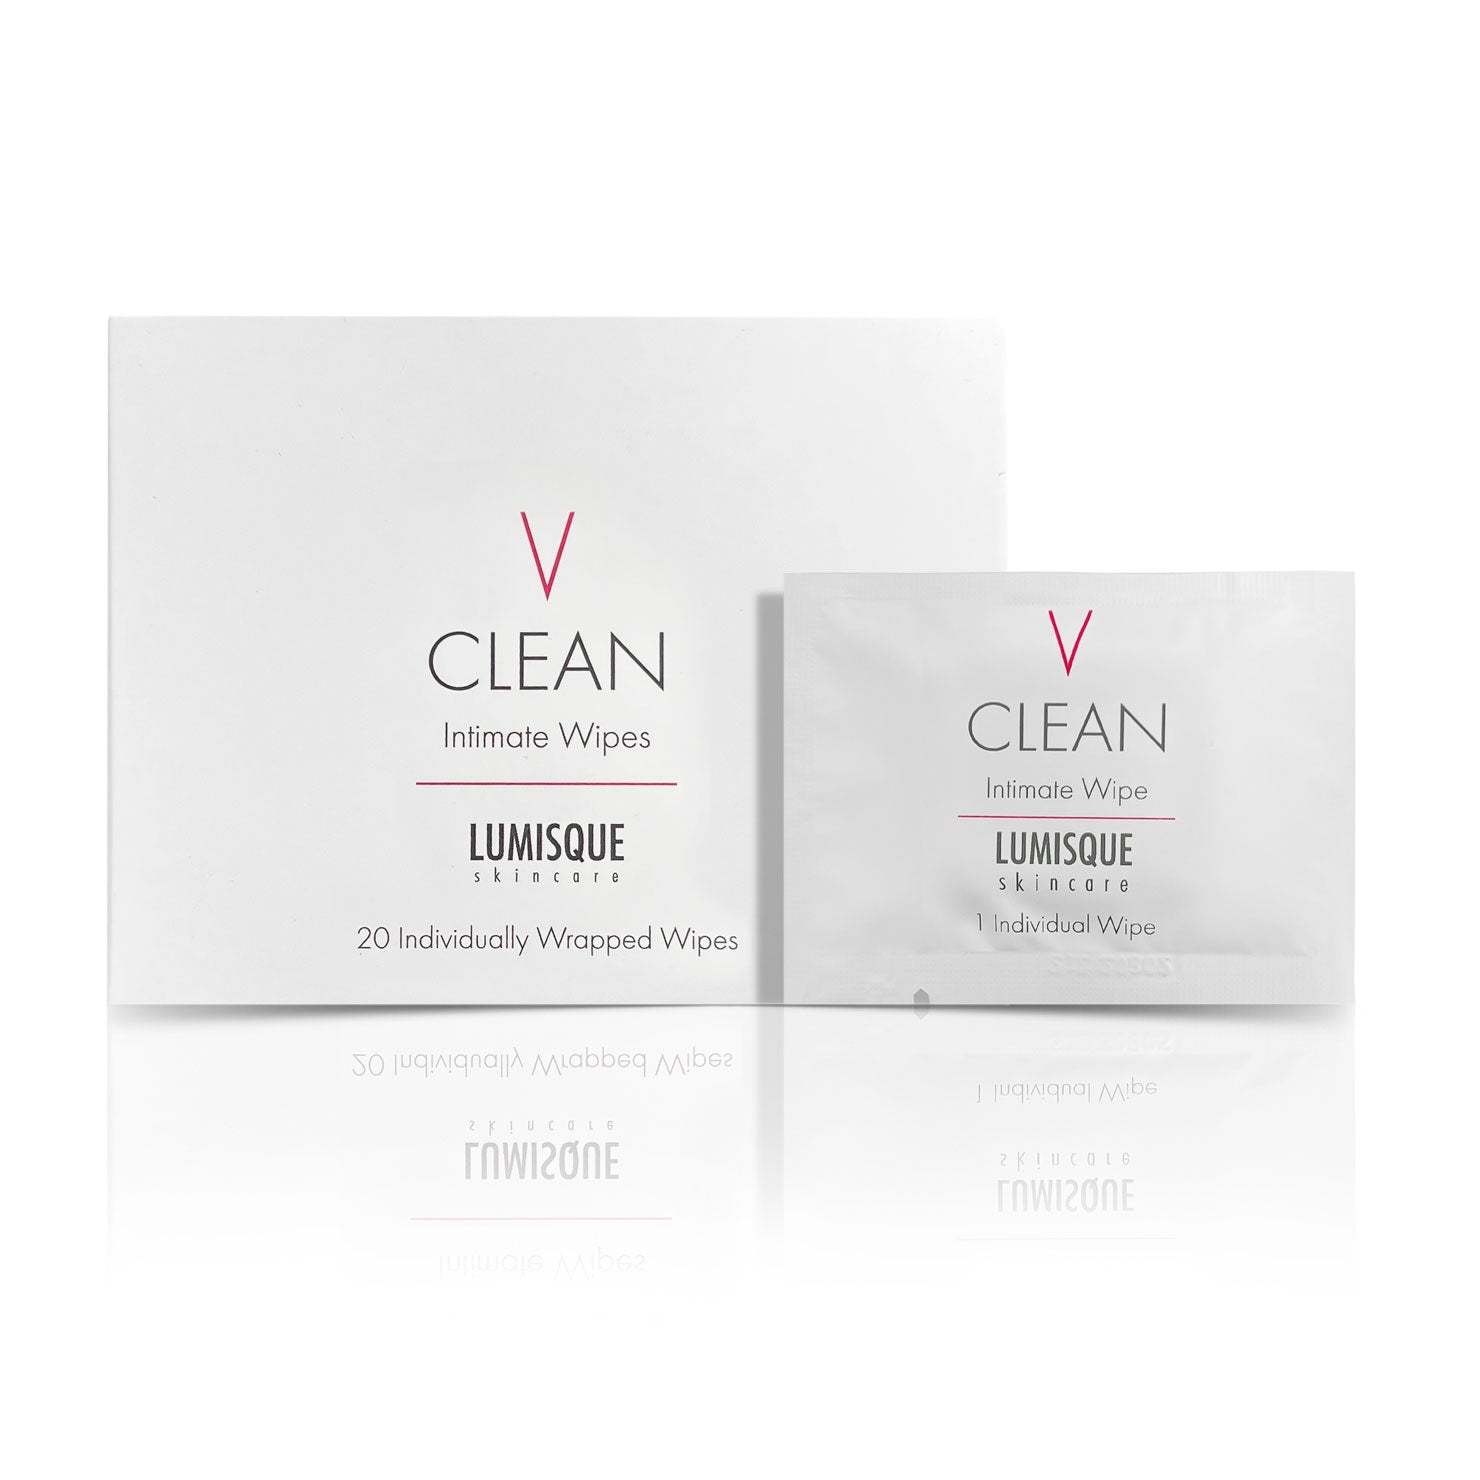 V CLEAN Intimate Wipes